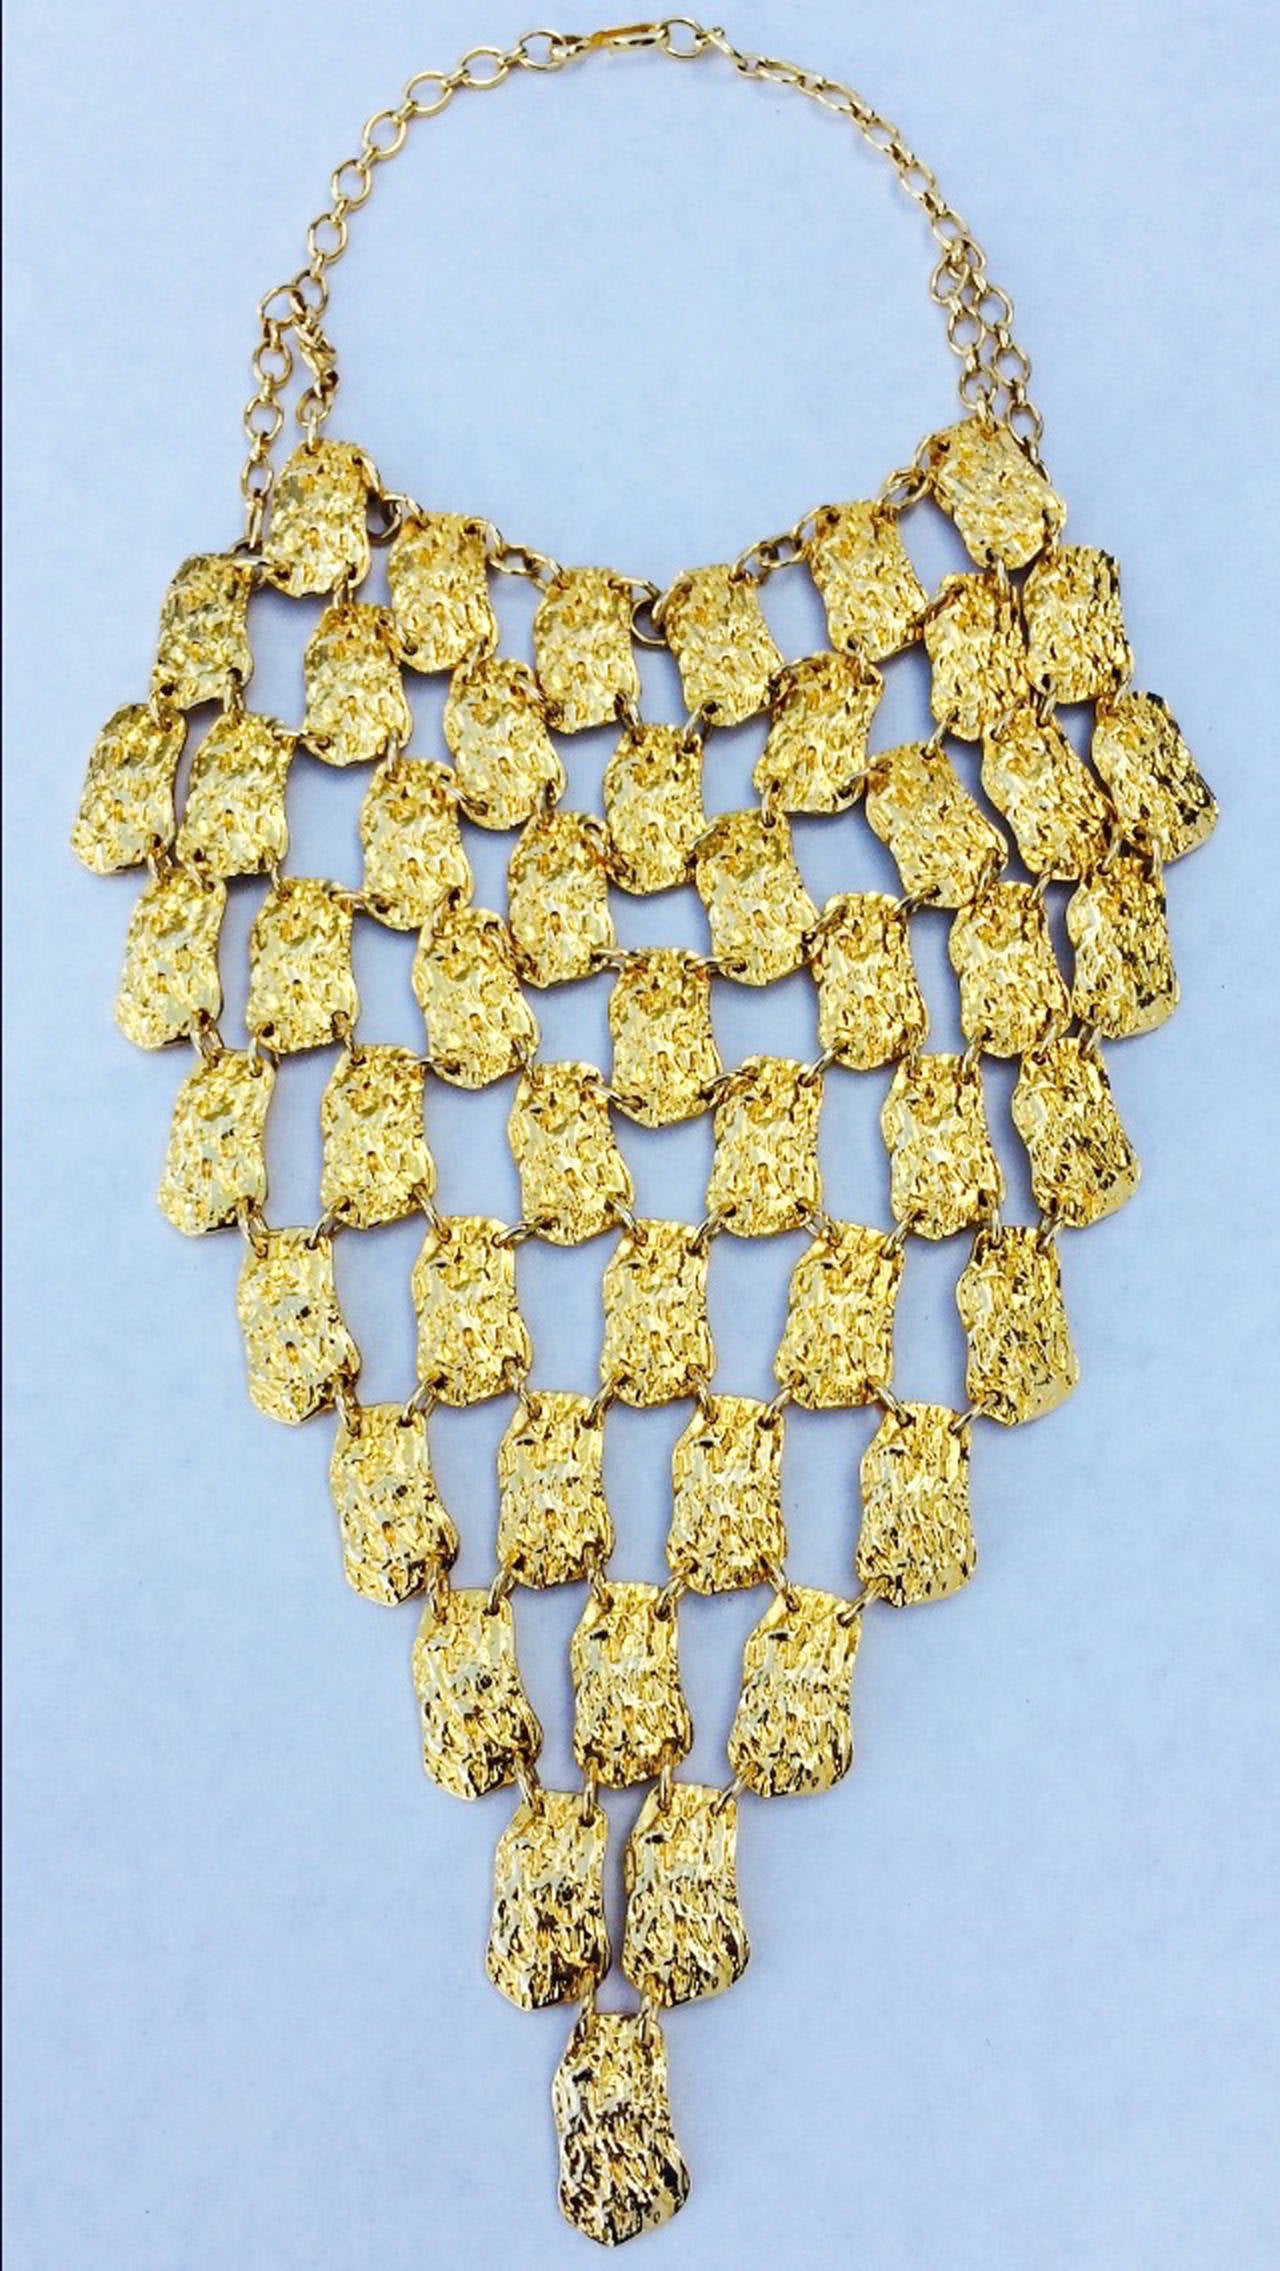 A fine and rare vintage Pauline Trigere bib necklace. Stunning gilt metal linked item features a massive 9